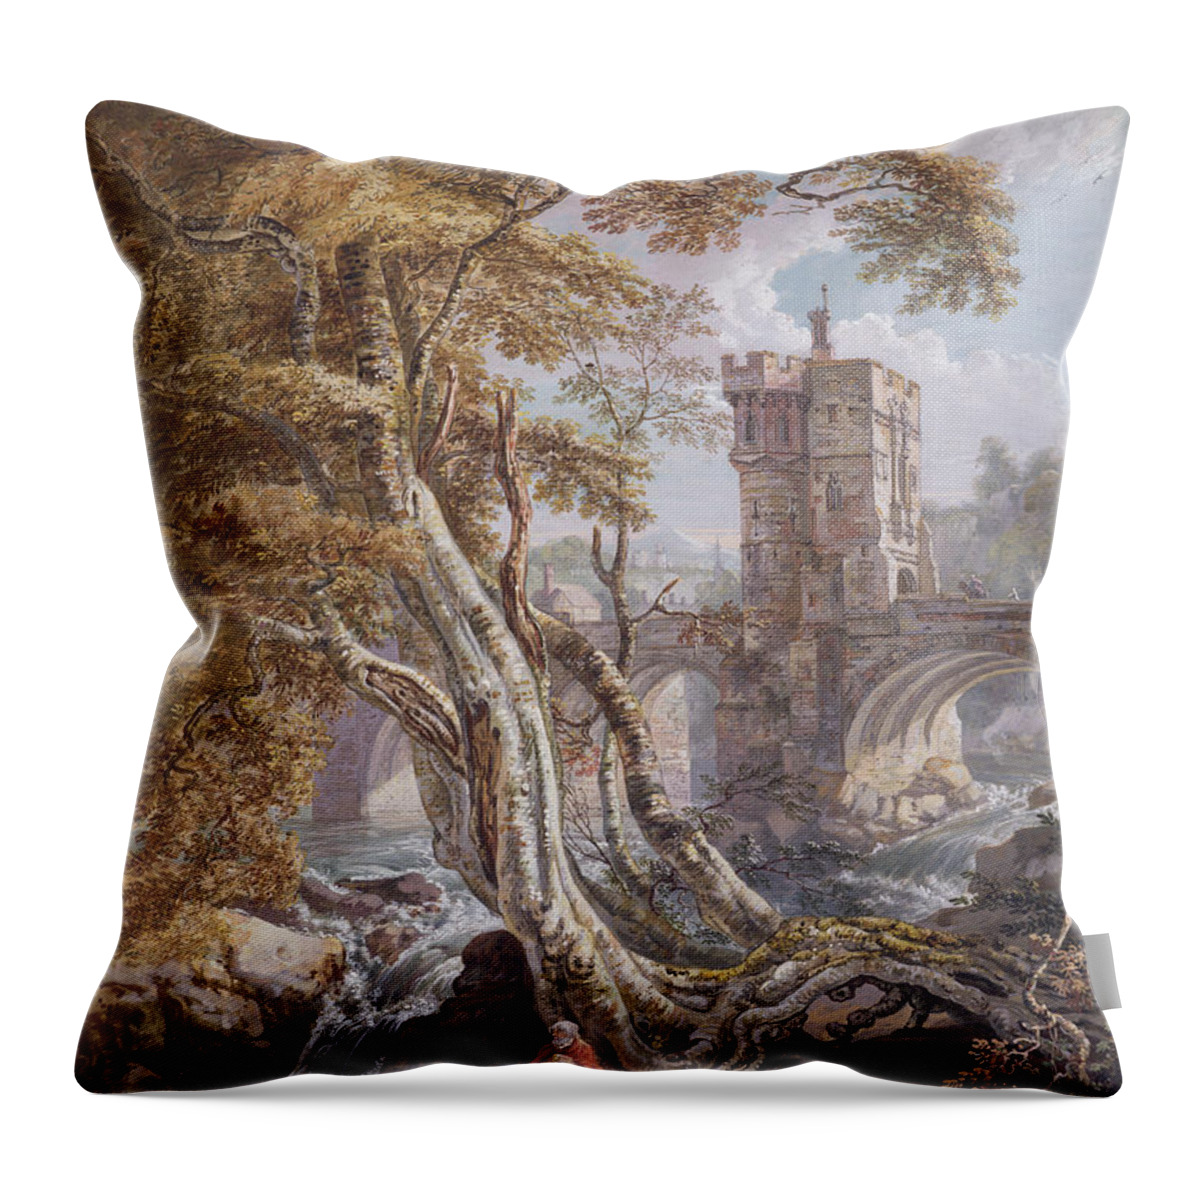 View Of The Old Welsh Bridge Throw Pillow featuring the painting View Of The Old Welsh Bridge by Paul Sandby